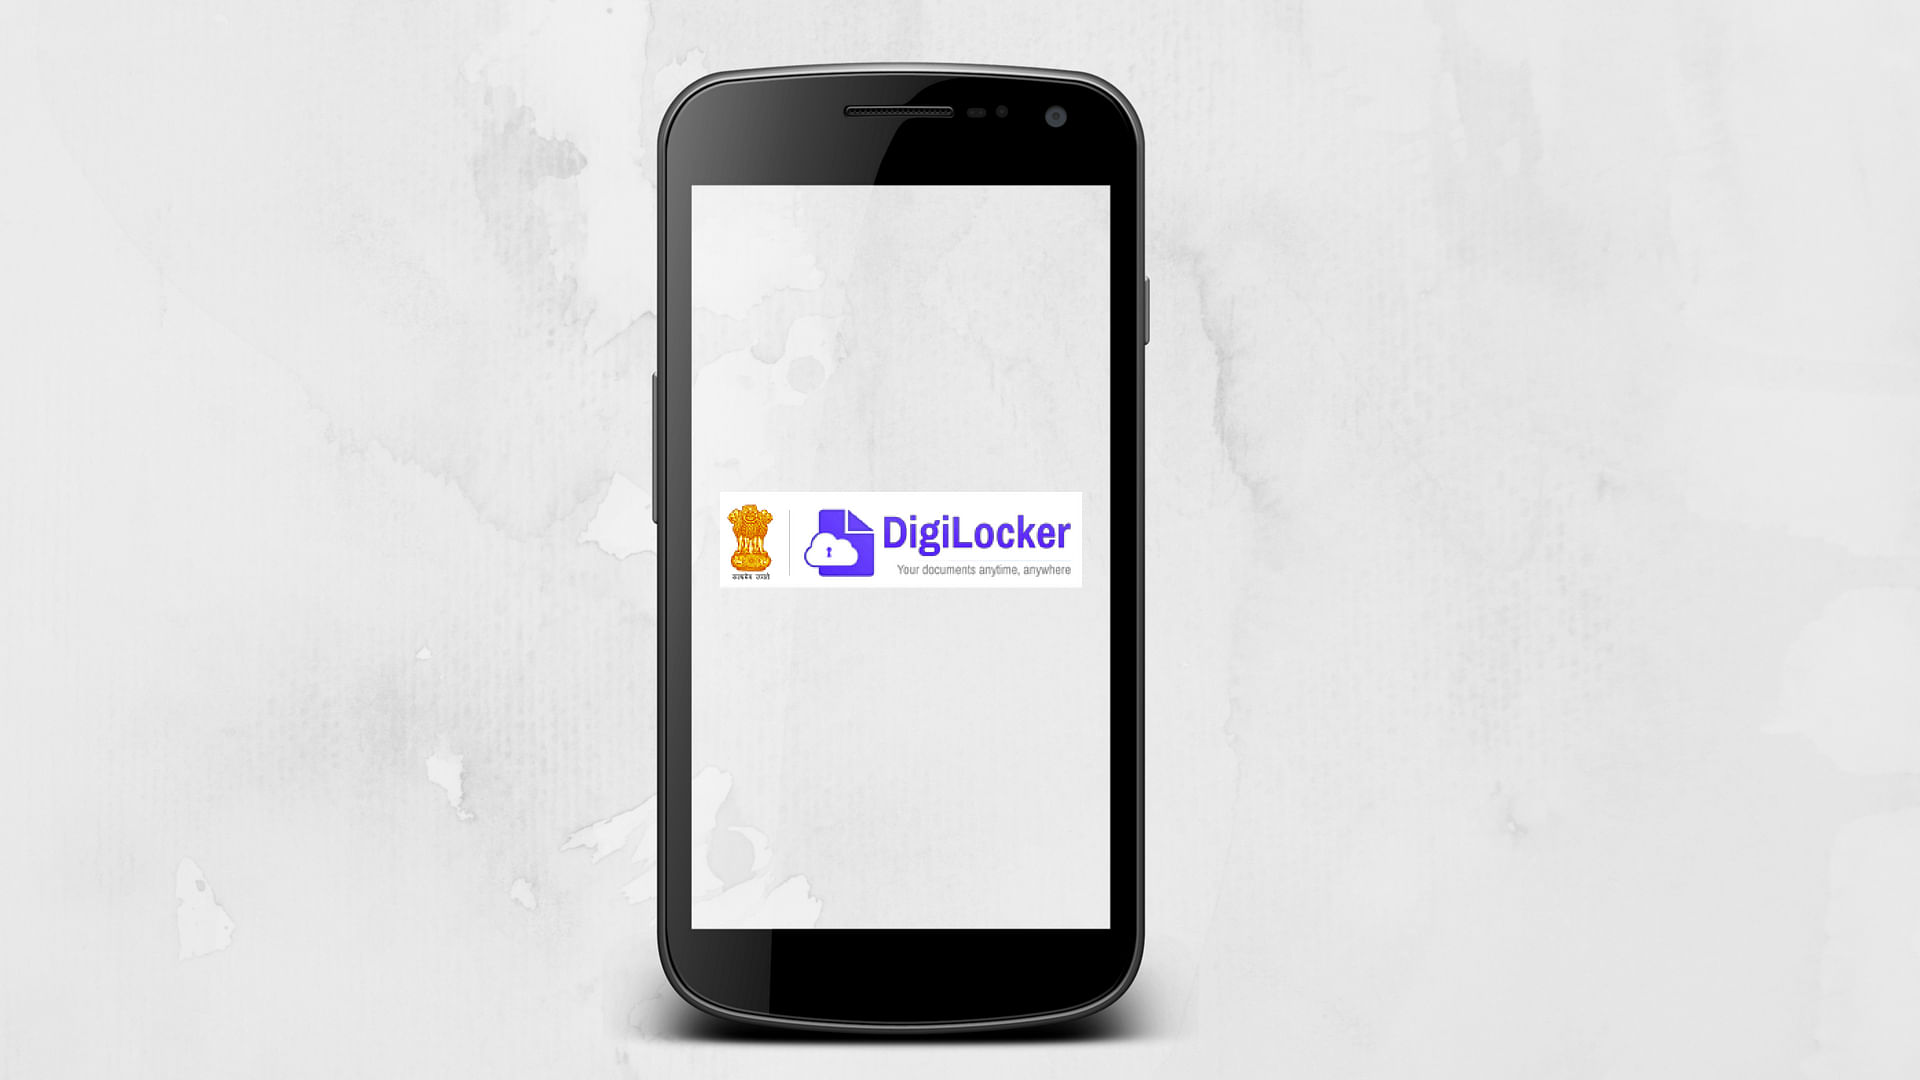 DigiLocker will provide the users with 1GB of cloud storage to store their documents, in order to minimise the use of physical documents.